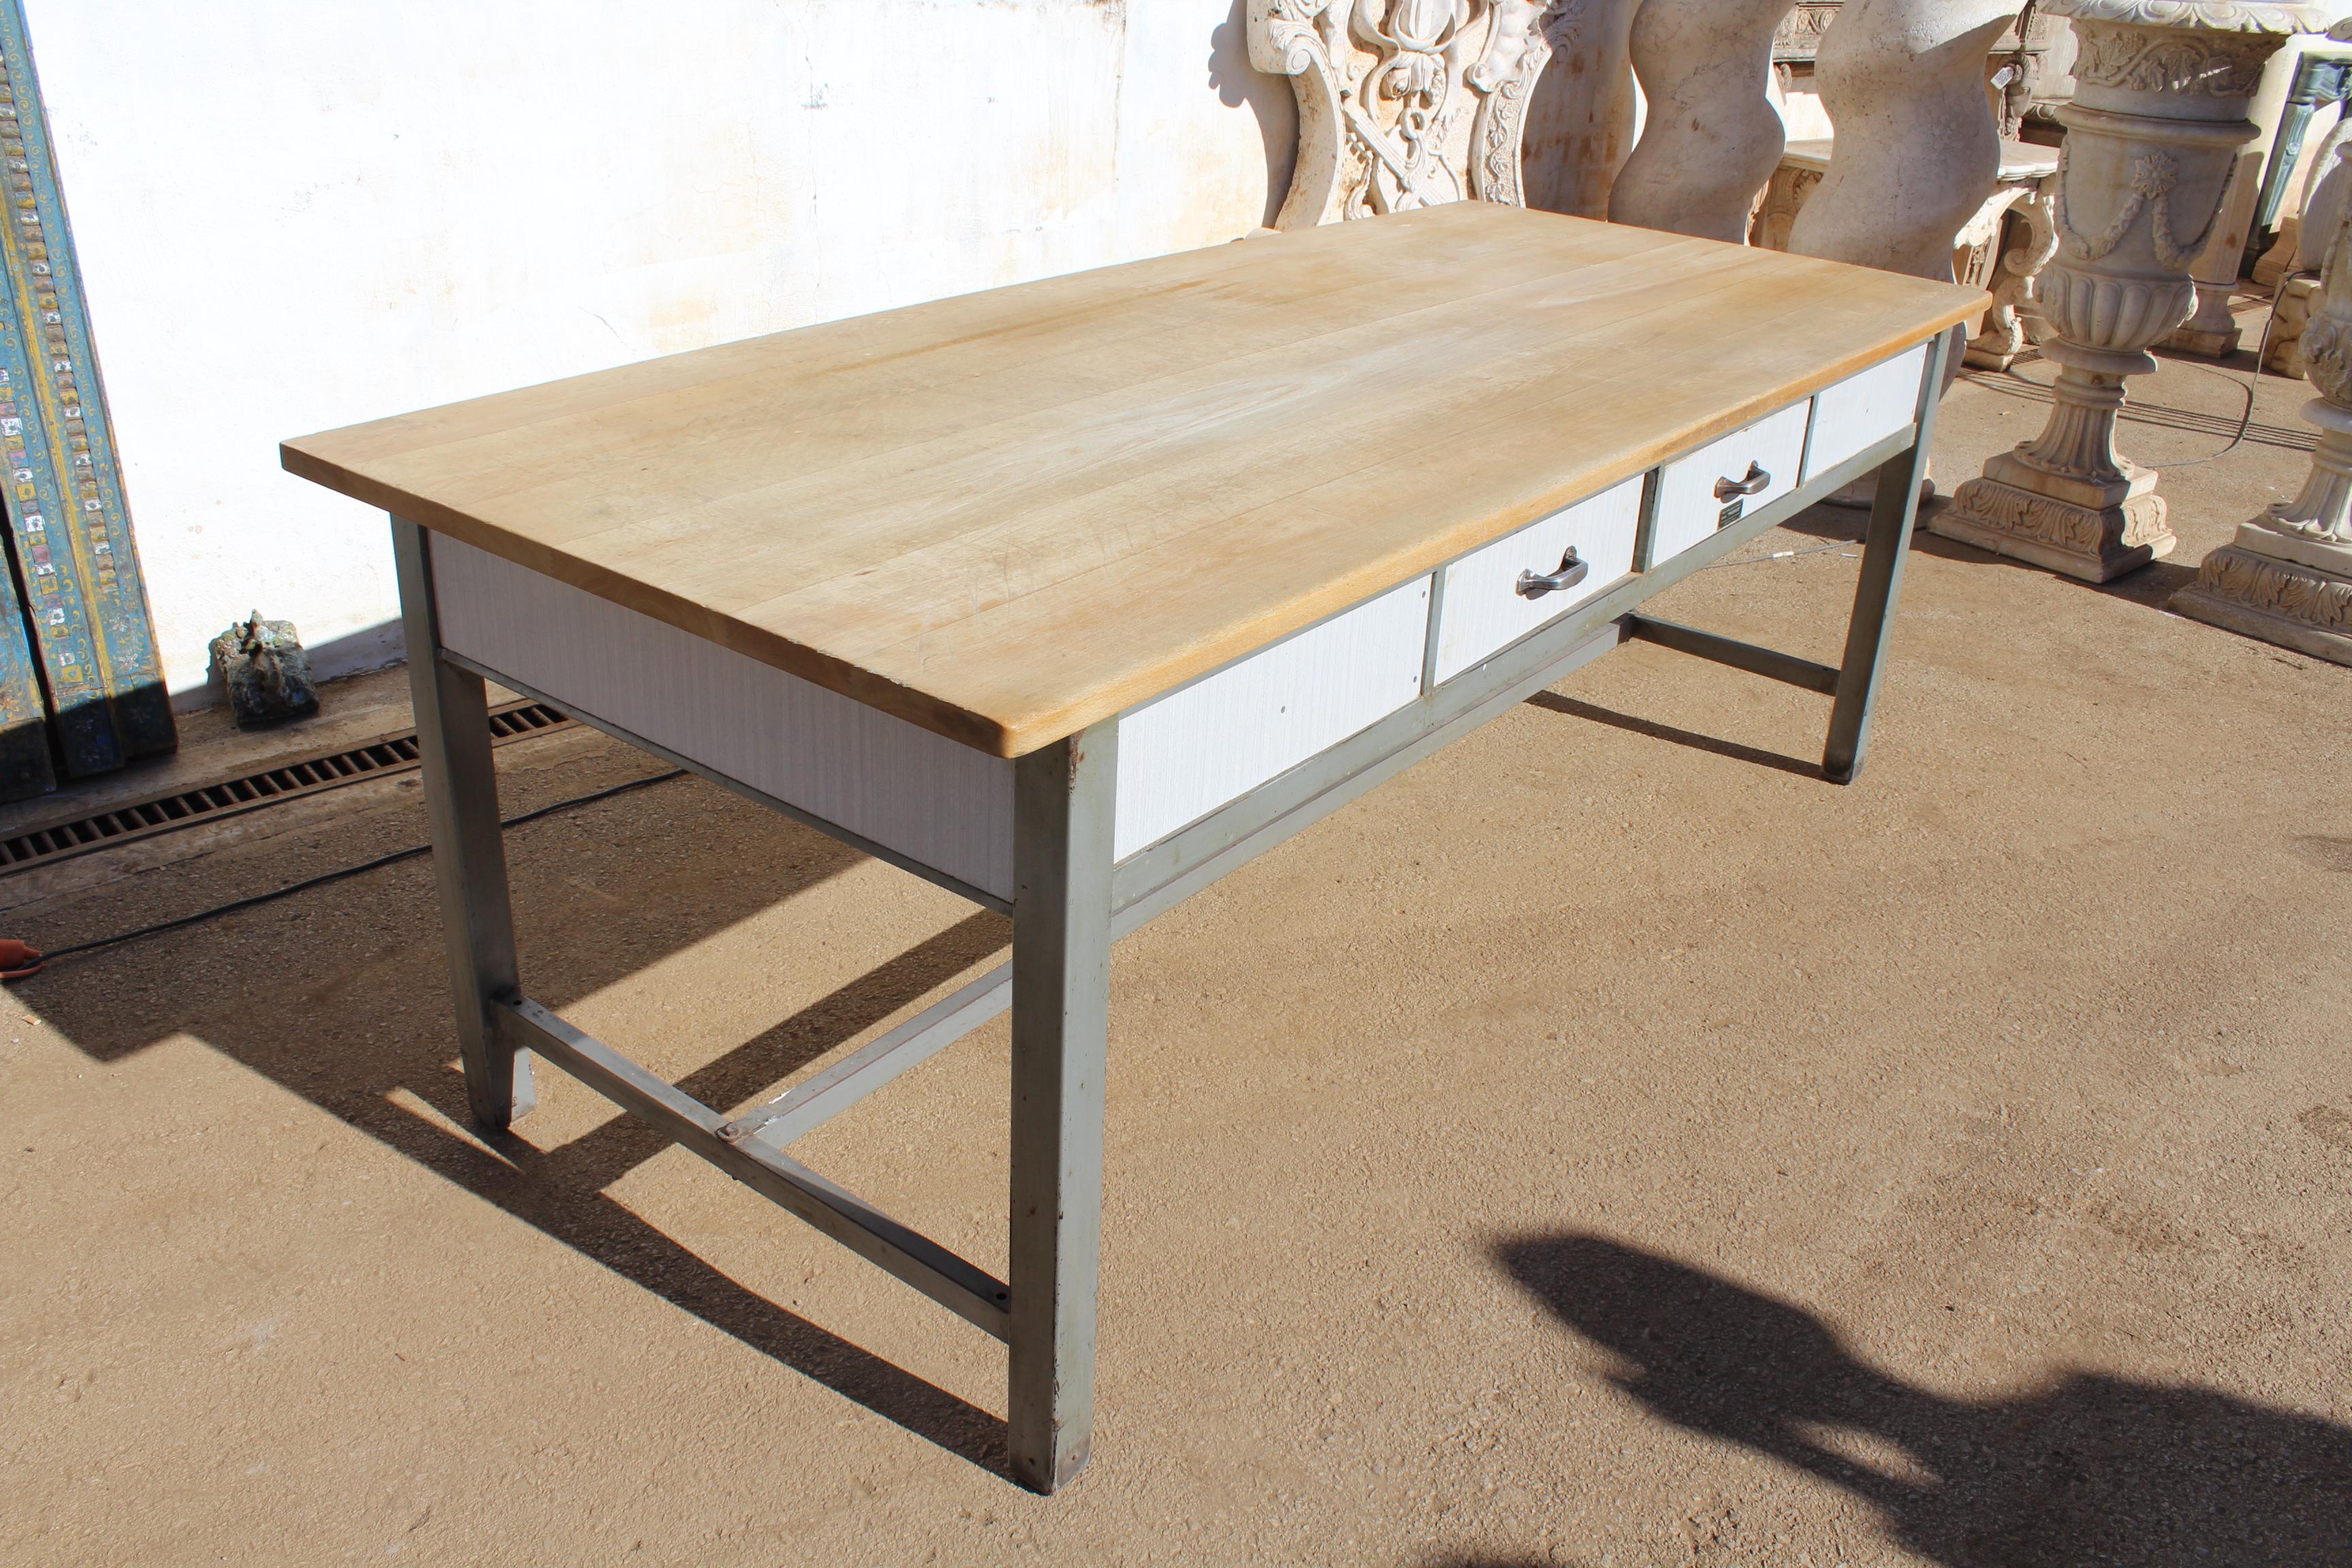 working table for bakery